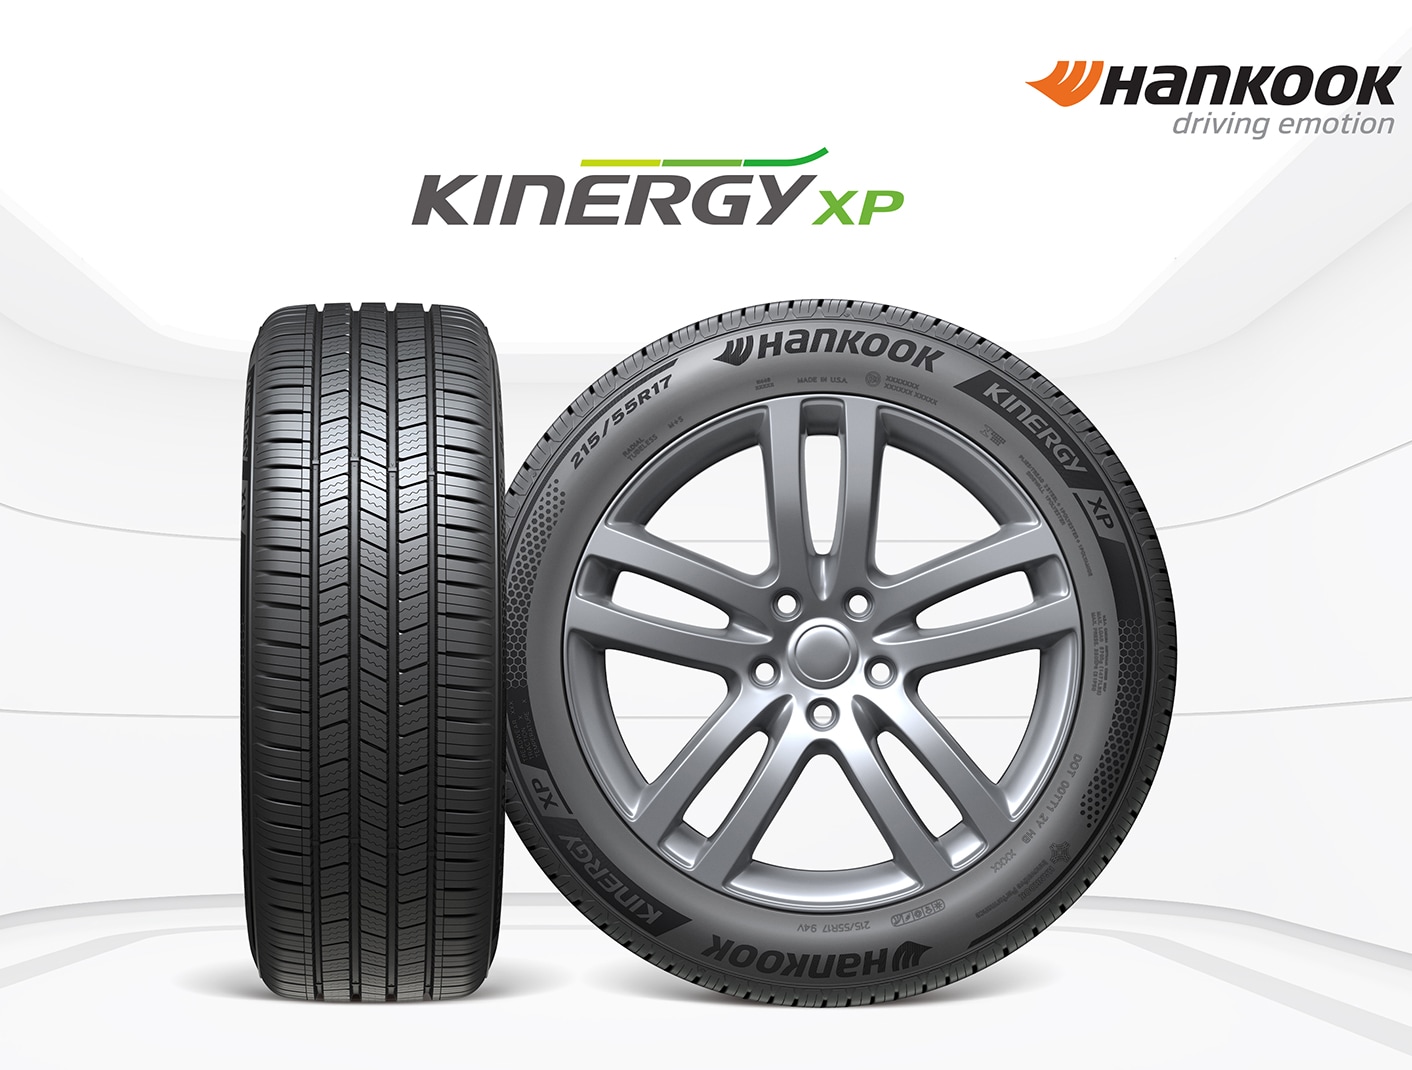 Hankook Tire launches Kinergy XP in North America for all-season, Grand Touring comfort and control